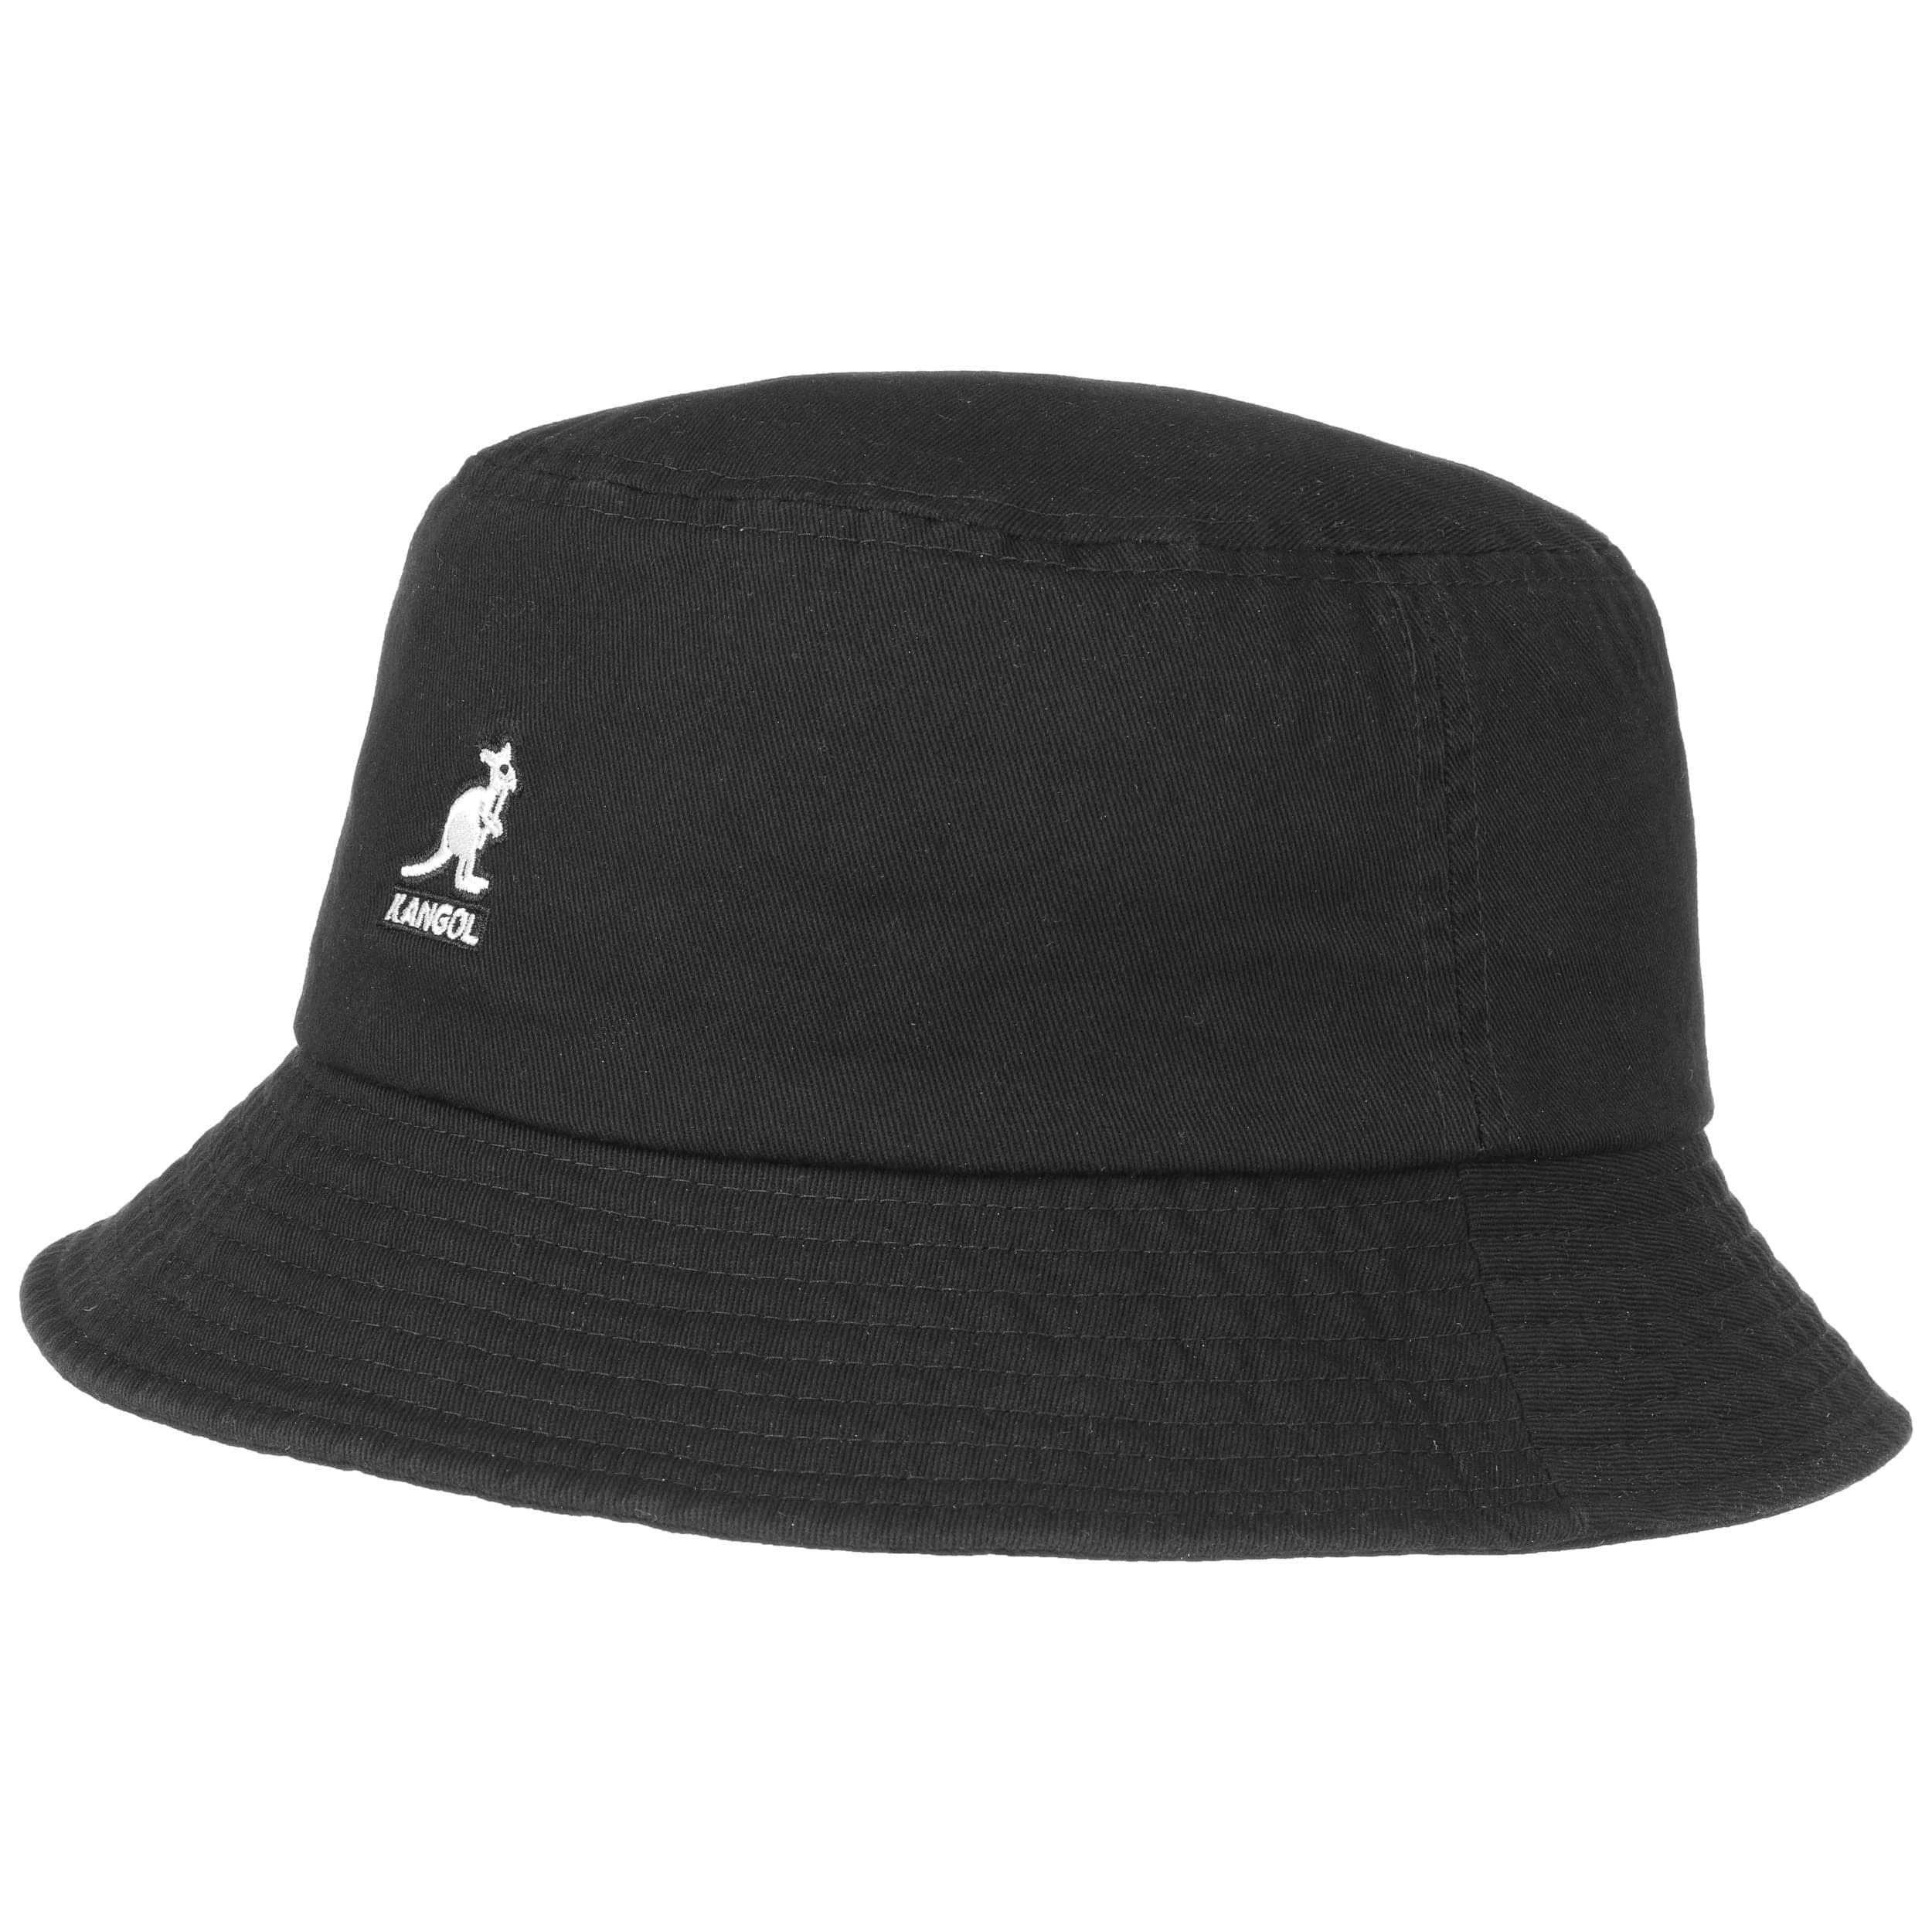 Washed Bucket Hat by Kangol, EUR 45,00 --> Hats, caps & beanies shop ...